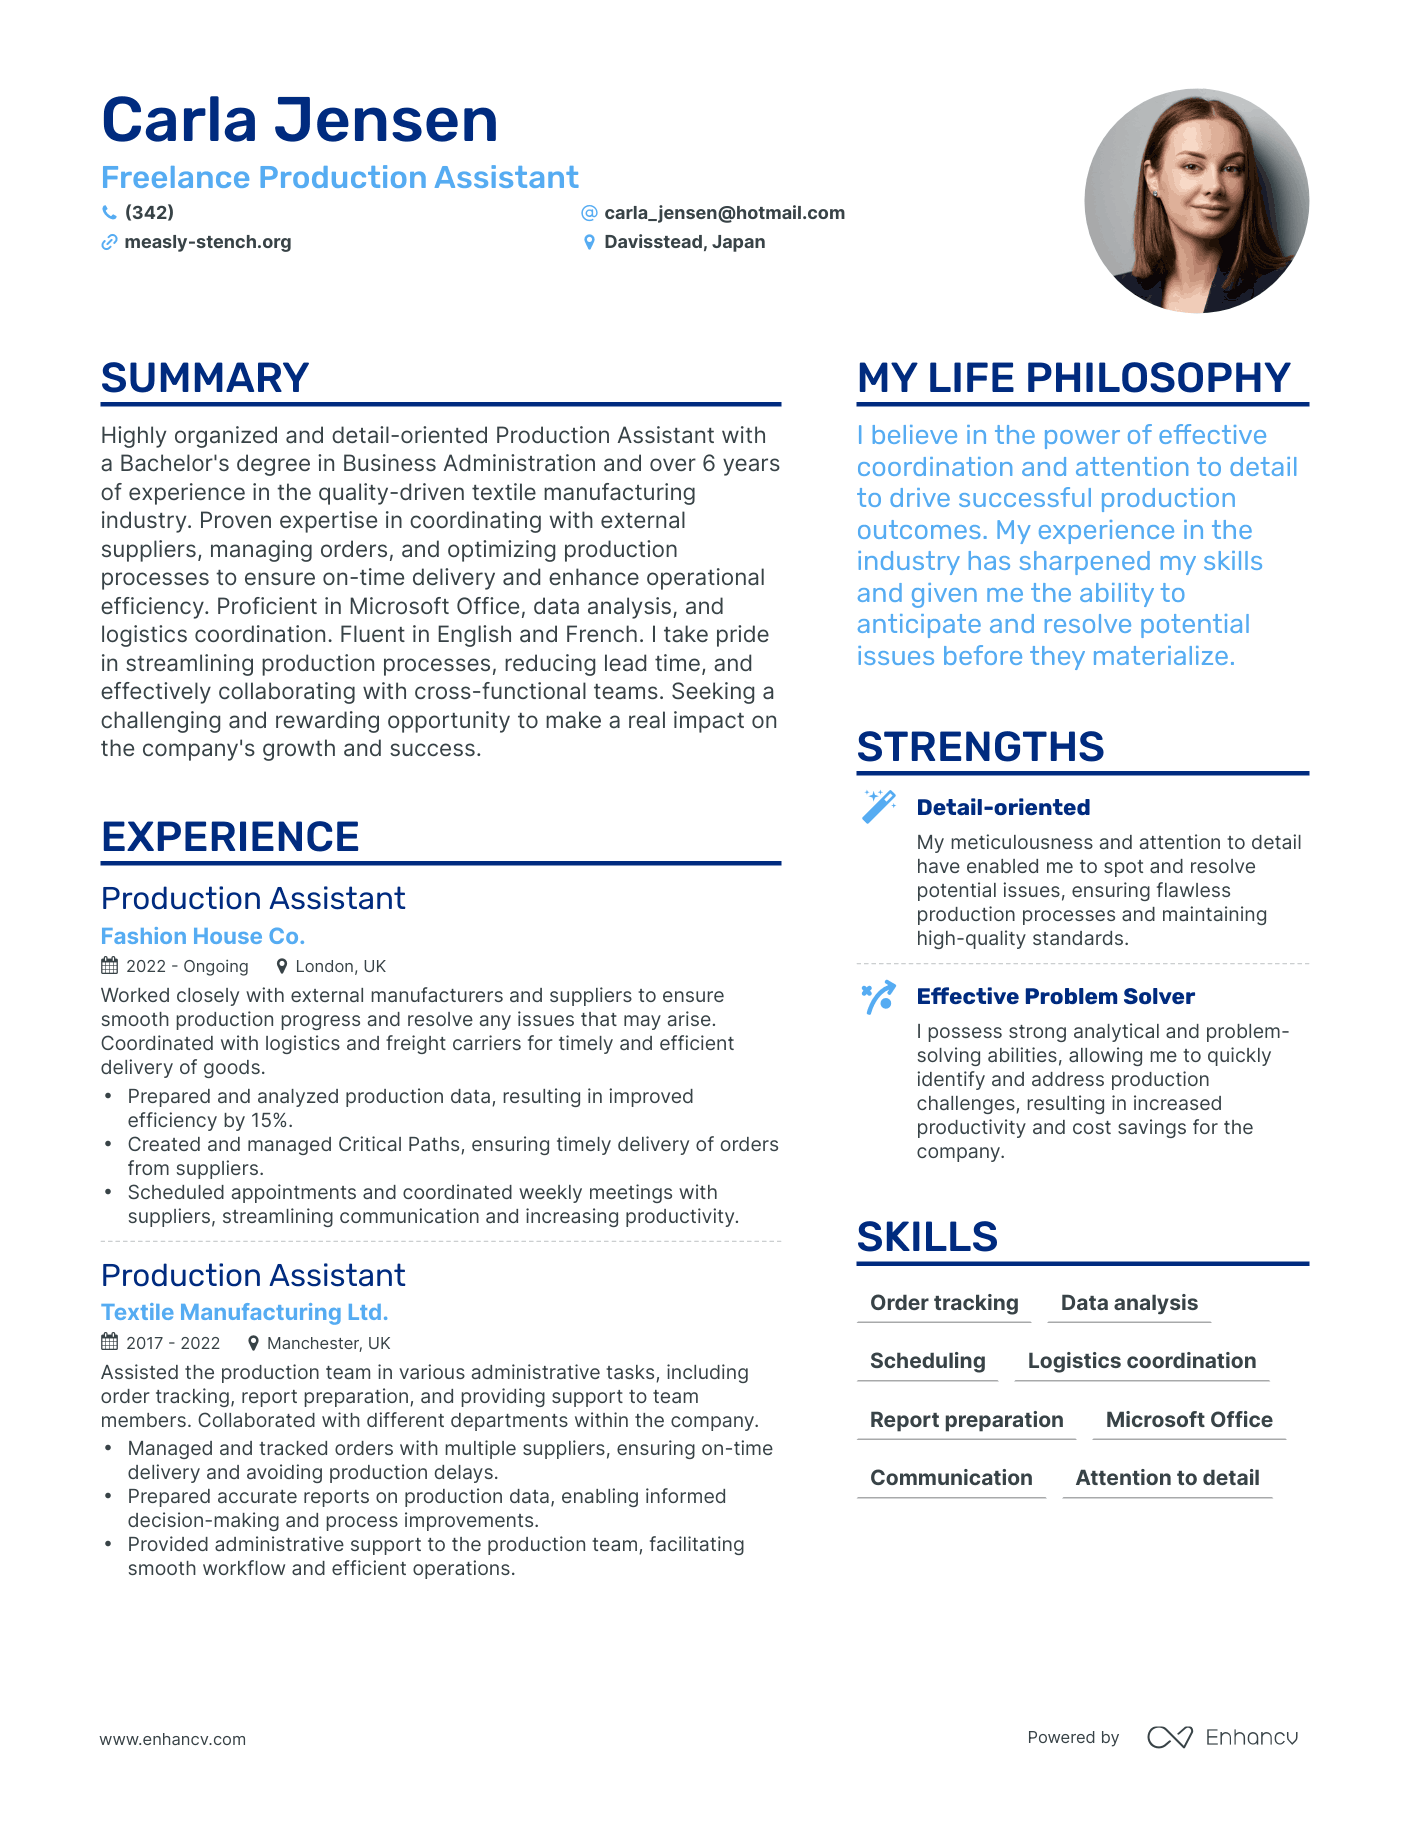 Freelance Production Assistant resume example